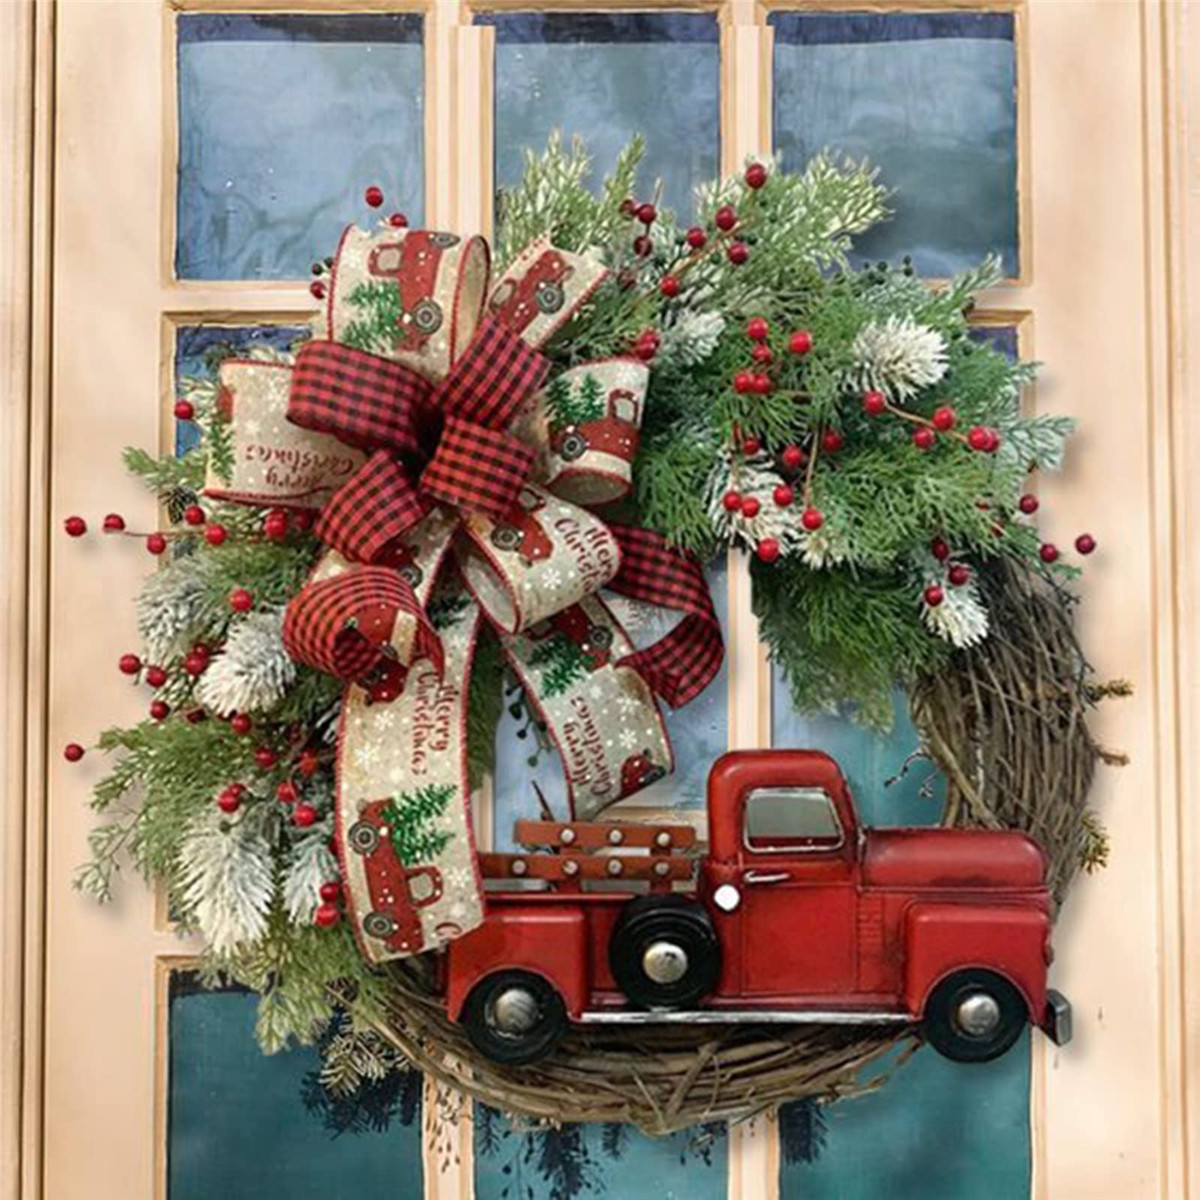 14" Red Truck Christmas Wreath-Vintage Truck Berry Autumn Wreath at The Front Door-Wooden Hanging Wreath for Indoor and Outdoor Decoration - image 1 of 7